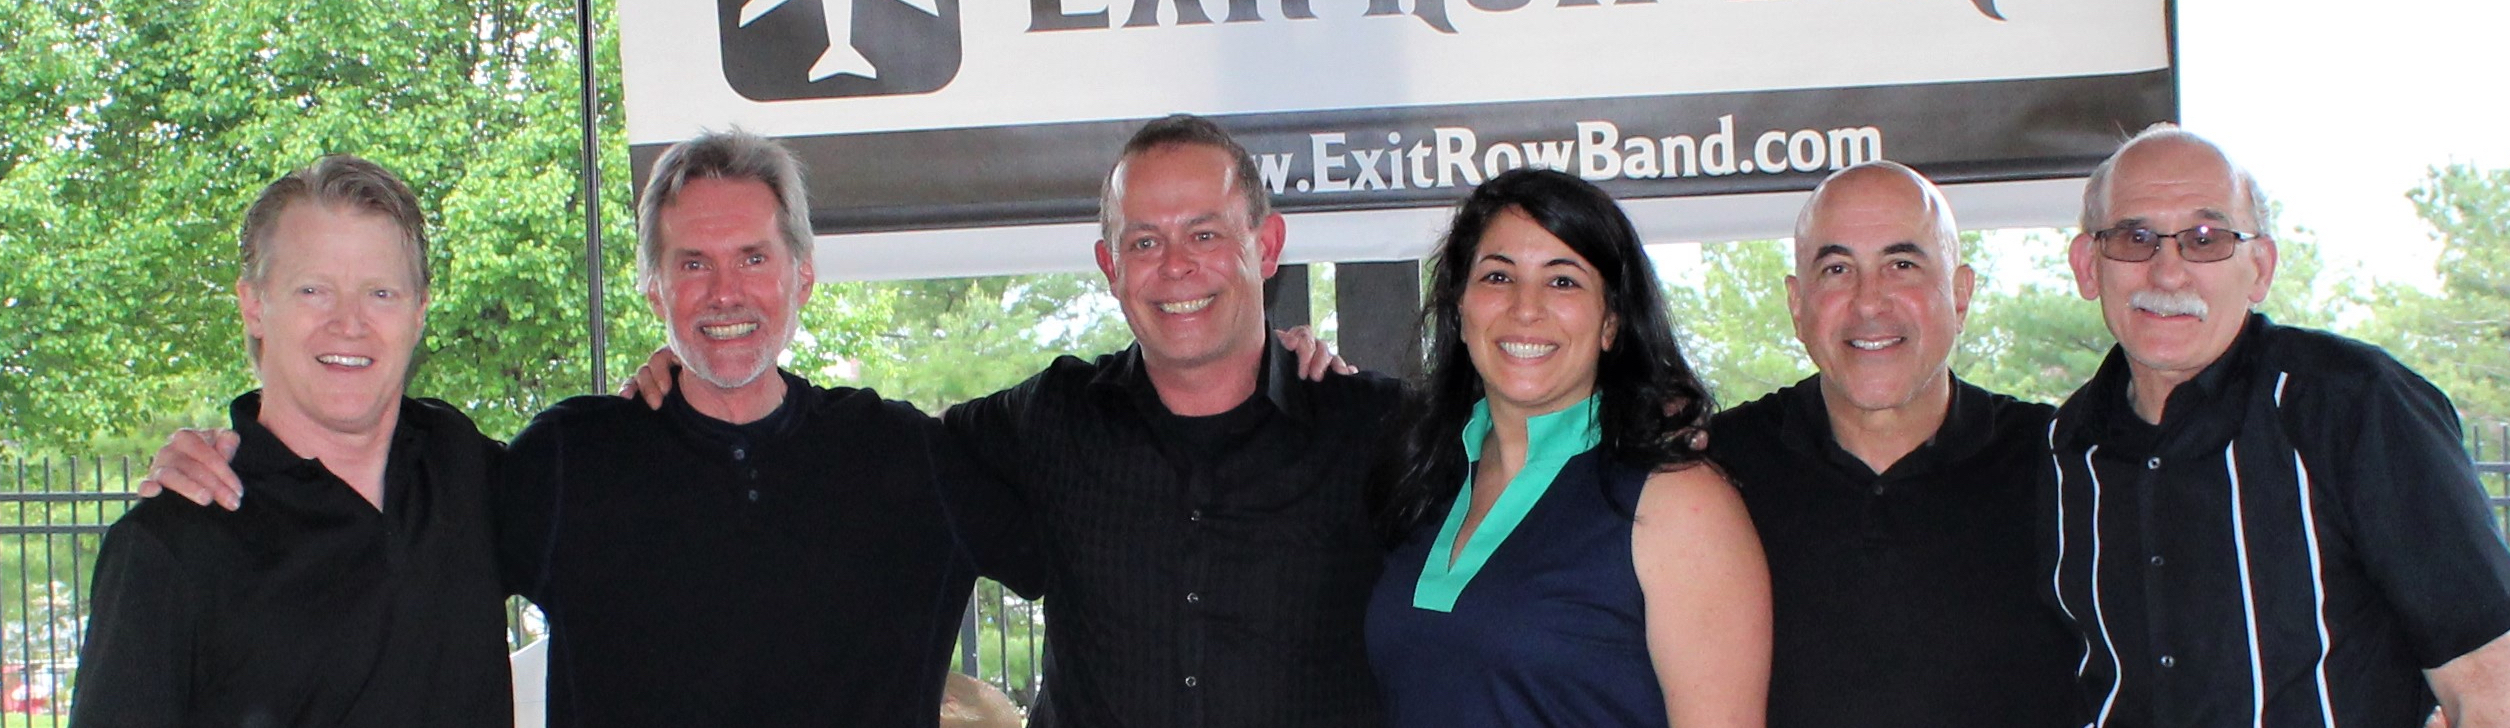 Best NJ Professional Corporate Event Cover Band NJ - Exit Row Band